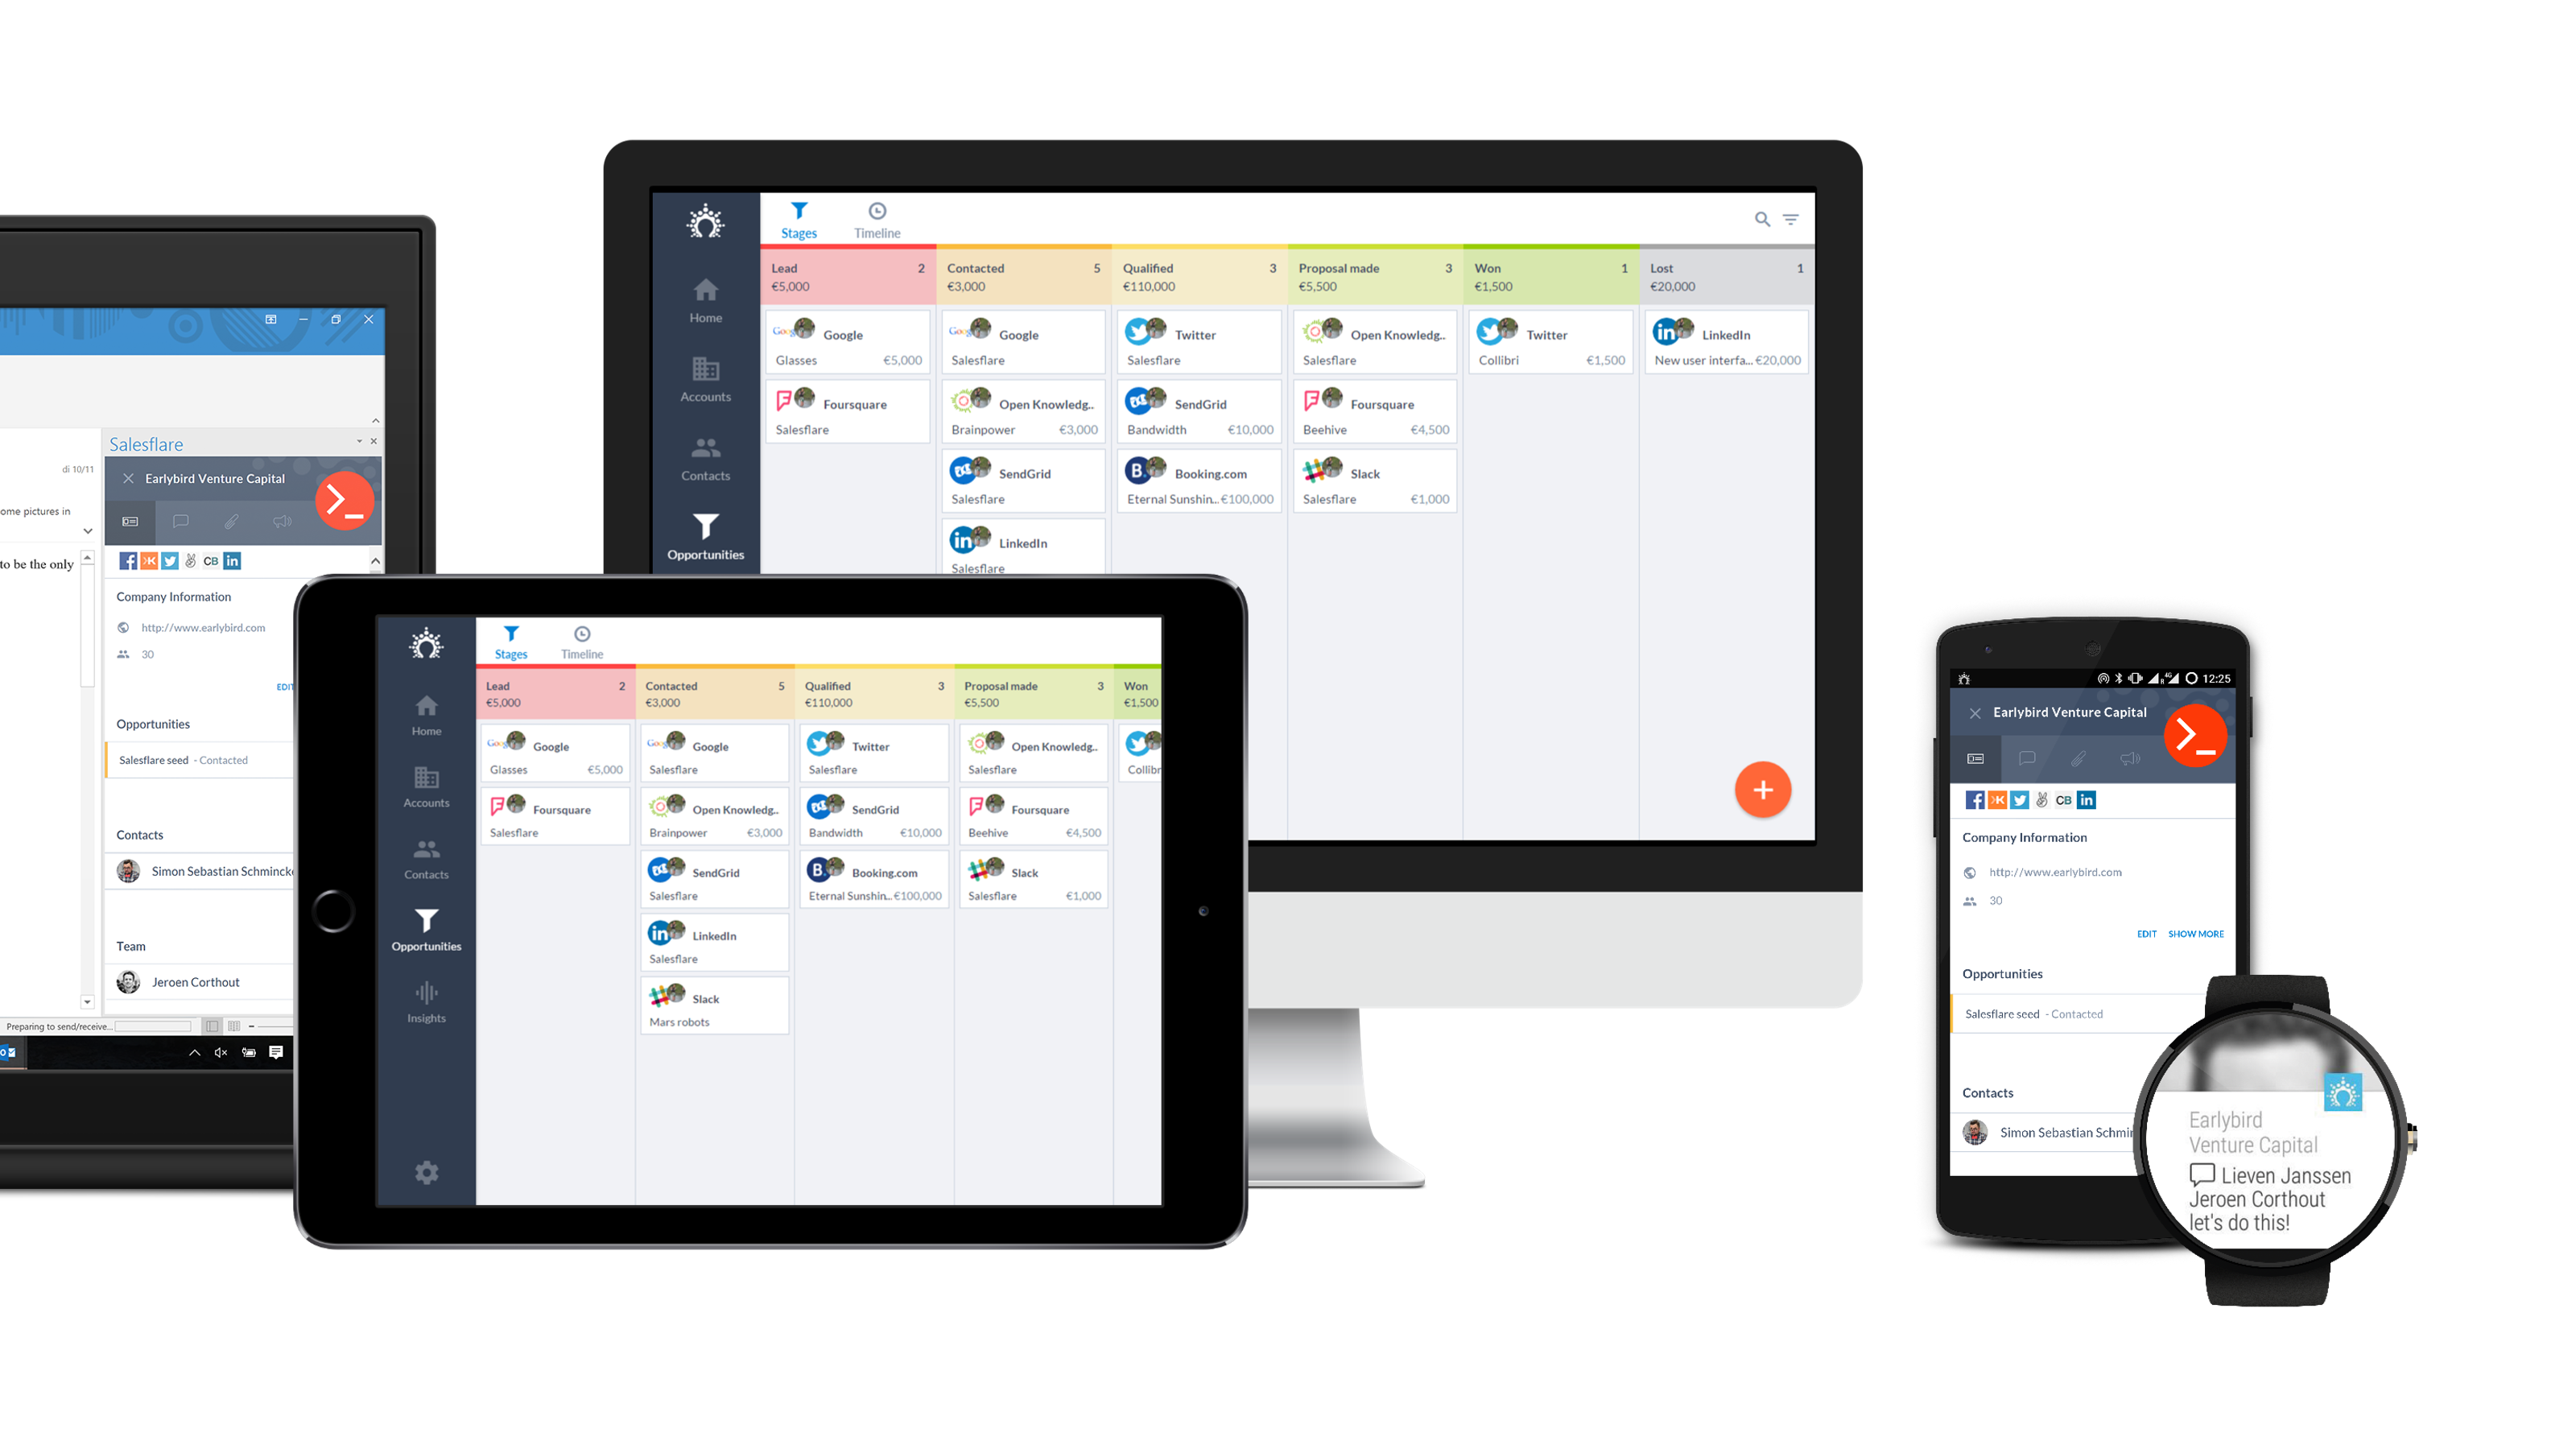 Salesflare Software - Salesflare is the only CRM that offers 100% of its functionality on 100% of the devices you use, so you're never dependent on having your laptop around. You always have everything at your fingertips.